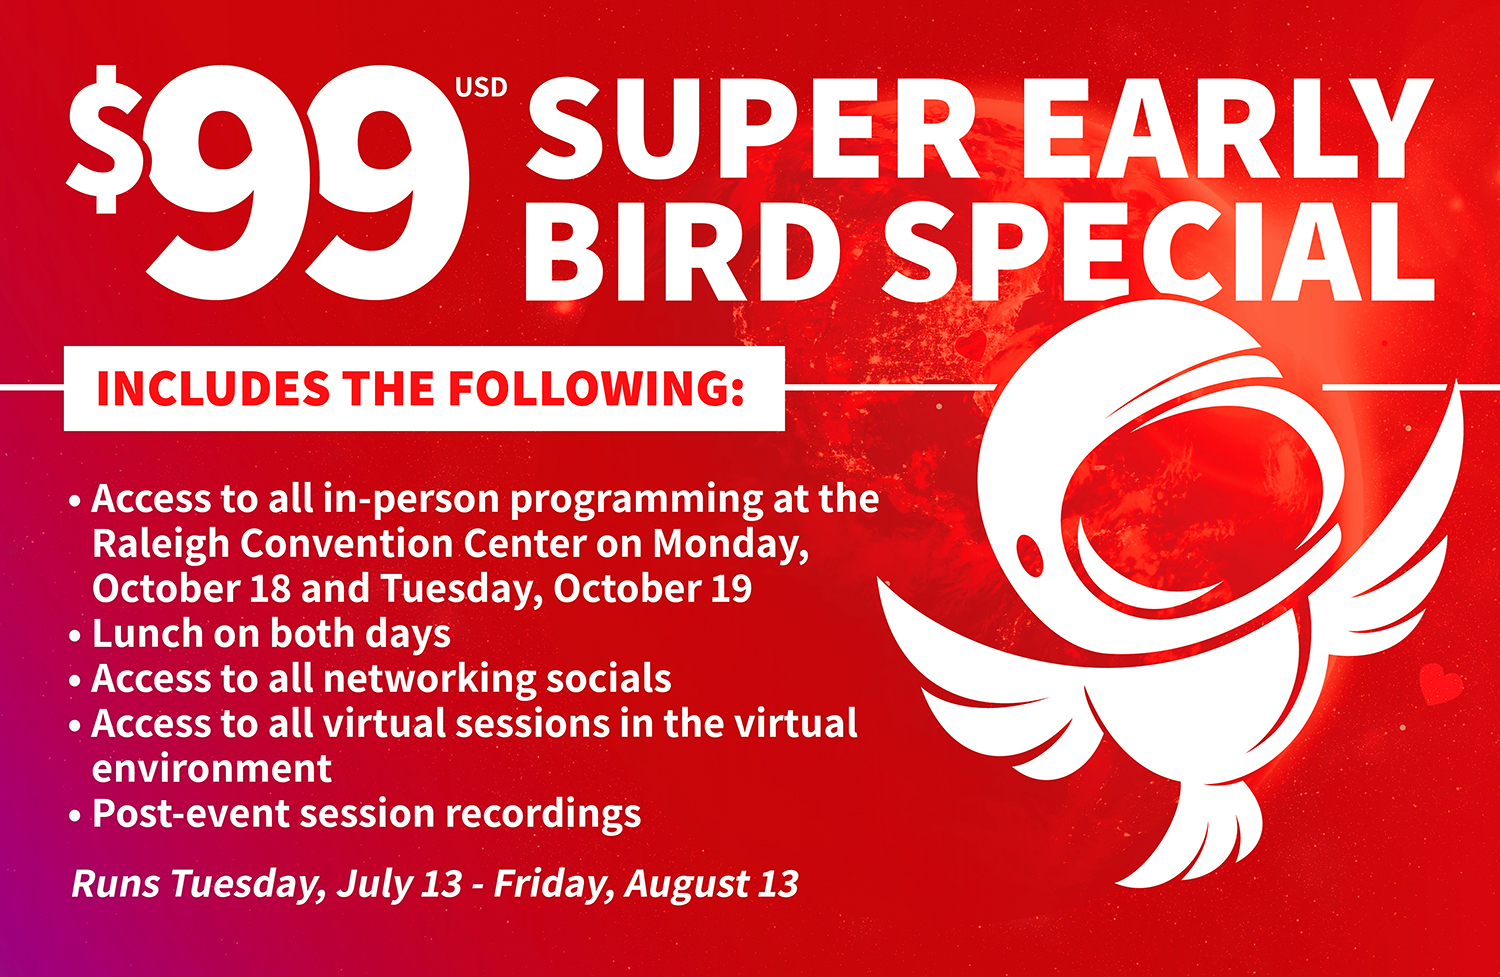 $99 Super Early Bird Special